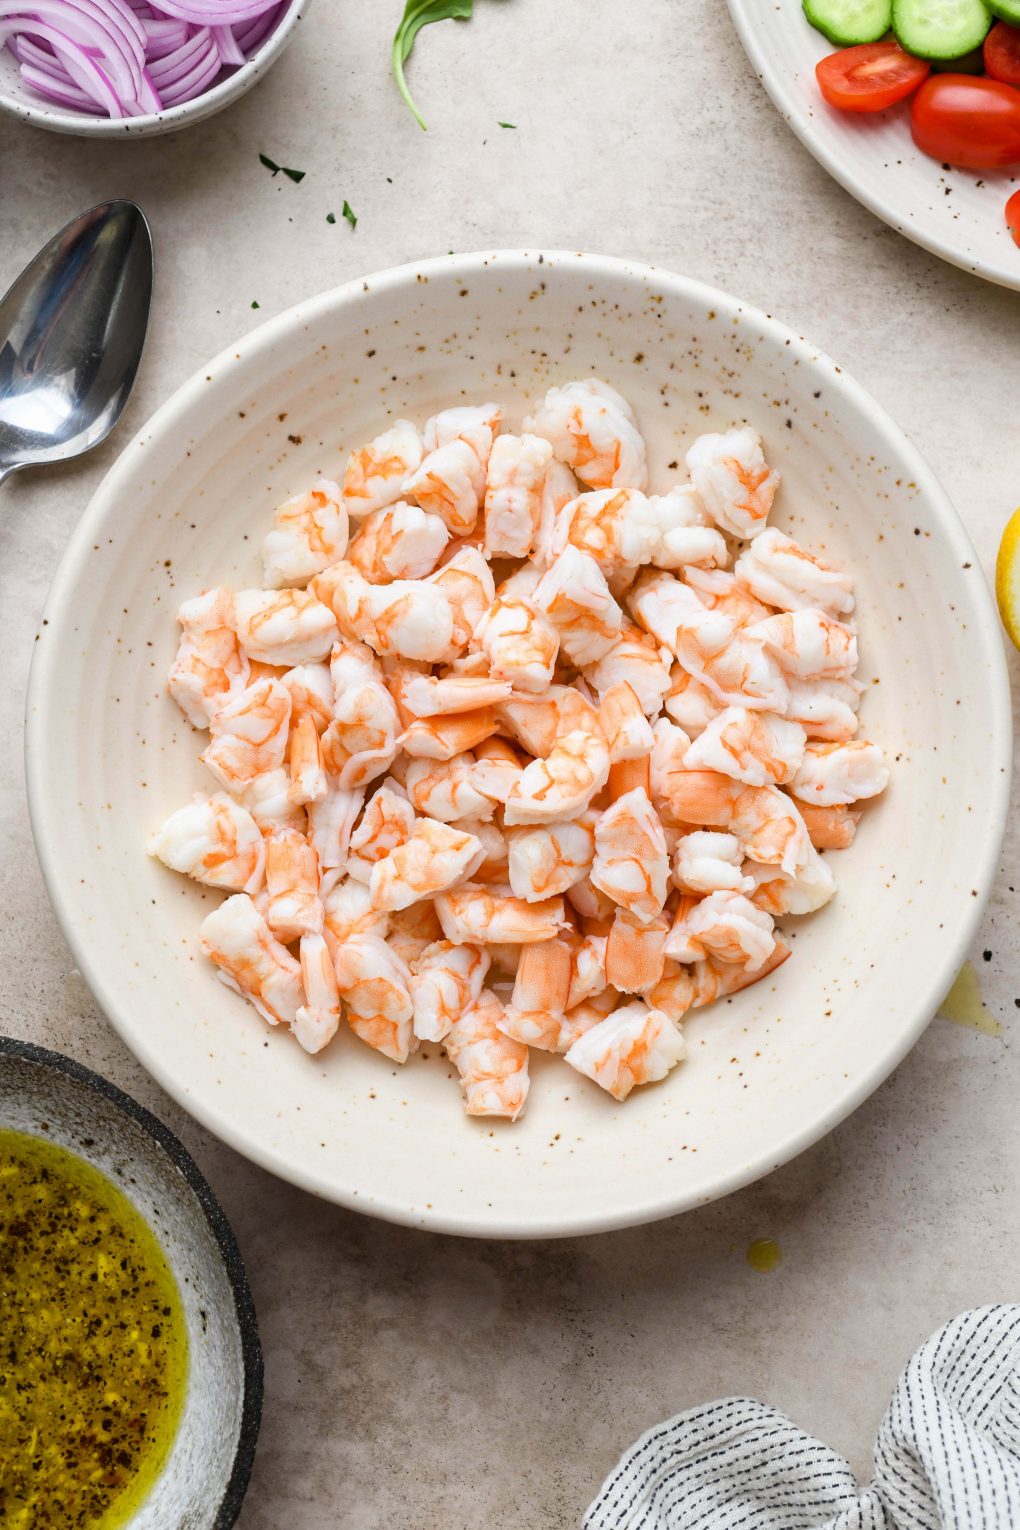 Image of a large speckled bowl of cooked shrimp without tails, cut into thirds.